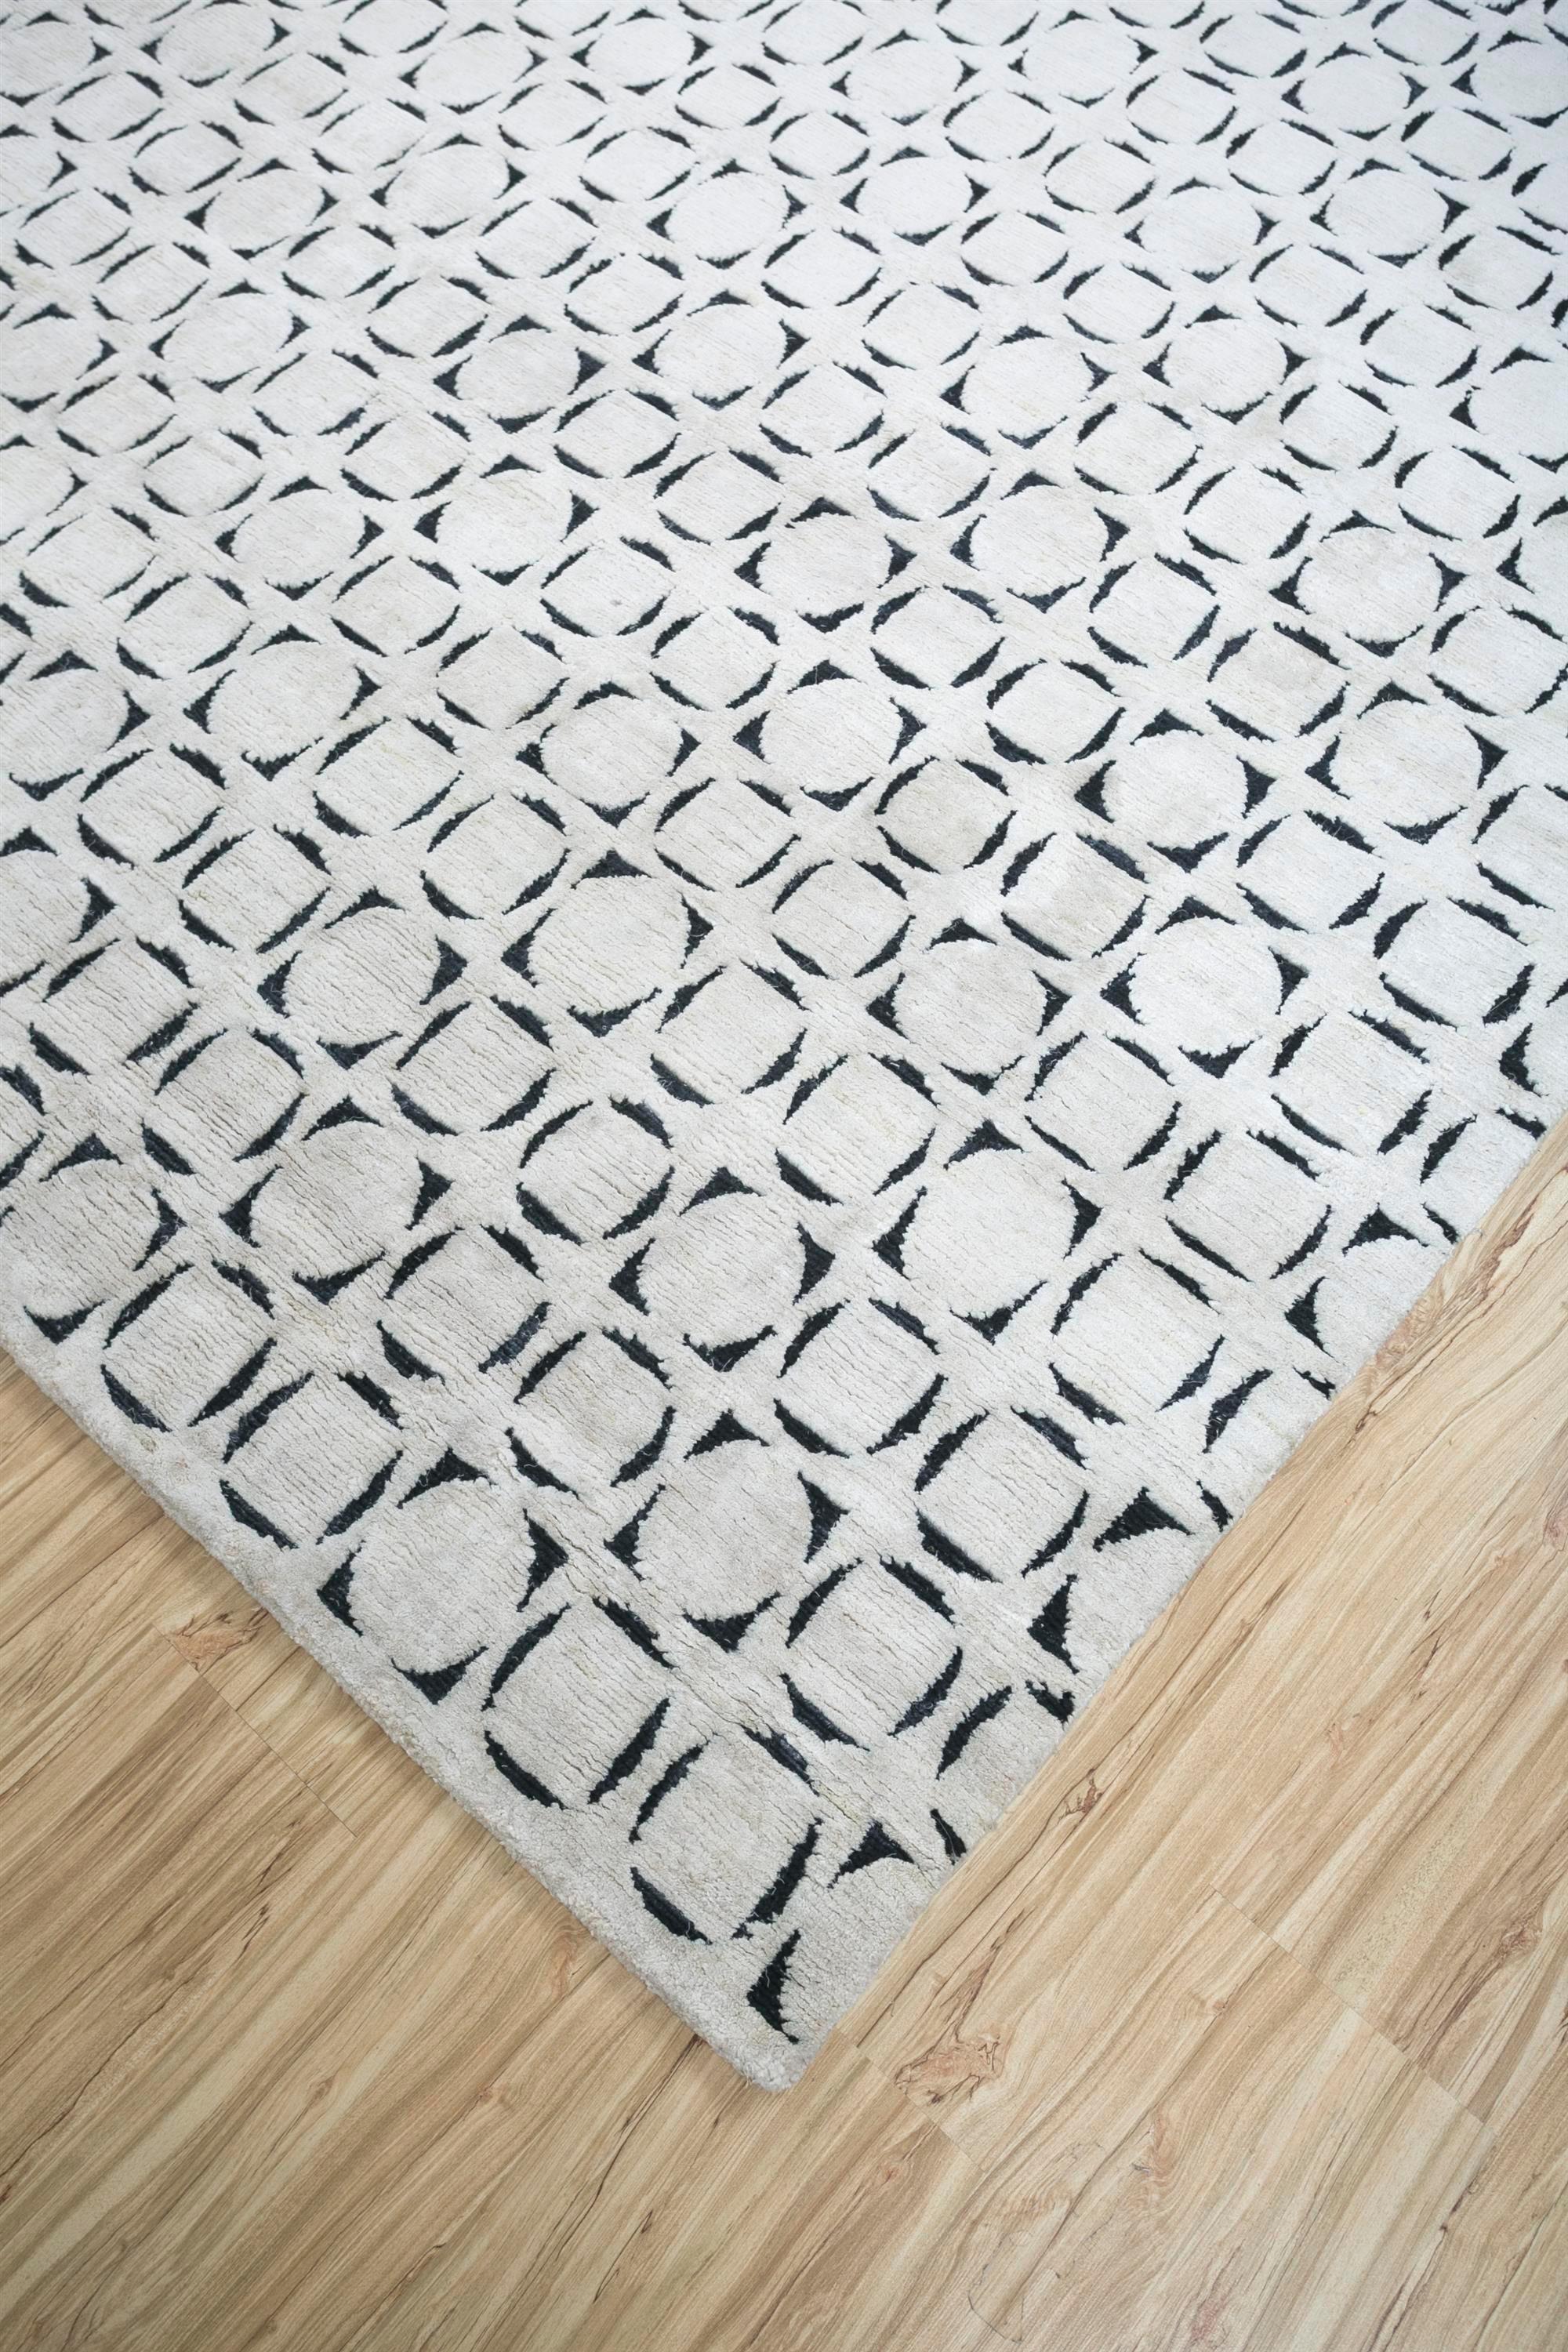 Modern Tranquility Threads Antique White & Ebony 240X300 cm Handknotted Rug For Sale